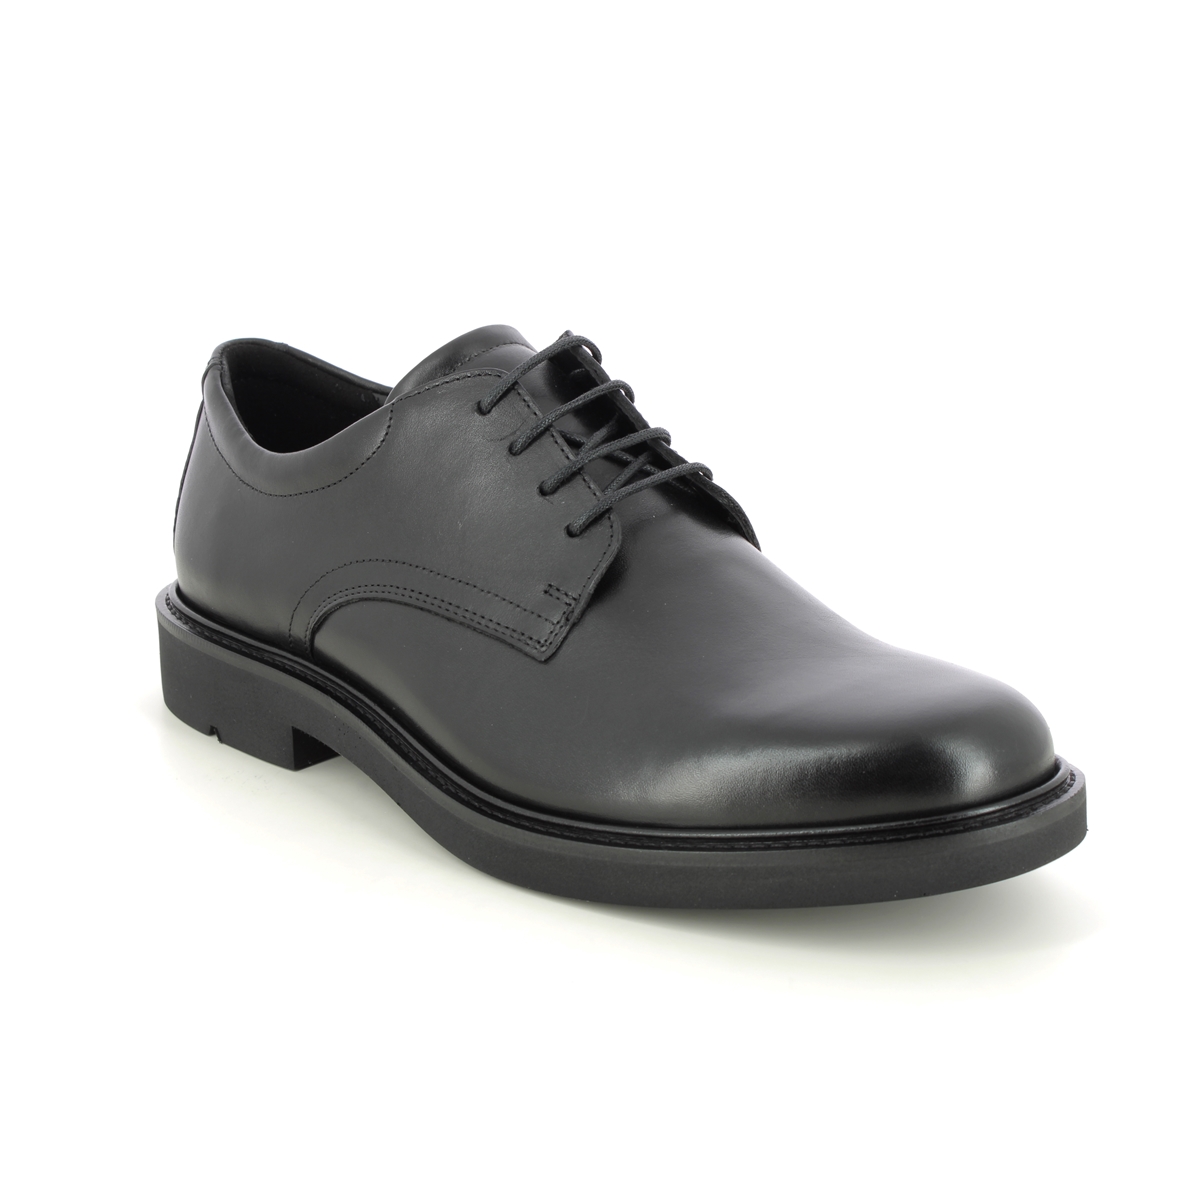 Ecco London Metropole Black Leather Mens Formal Shoes 525604-01001 In Size 45 In Plain Black Leather